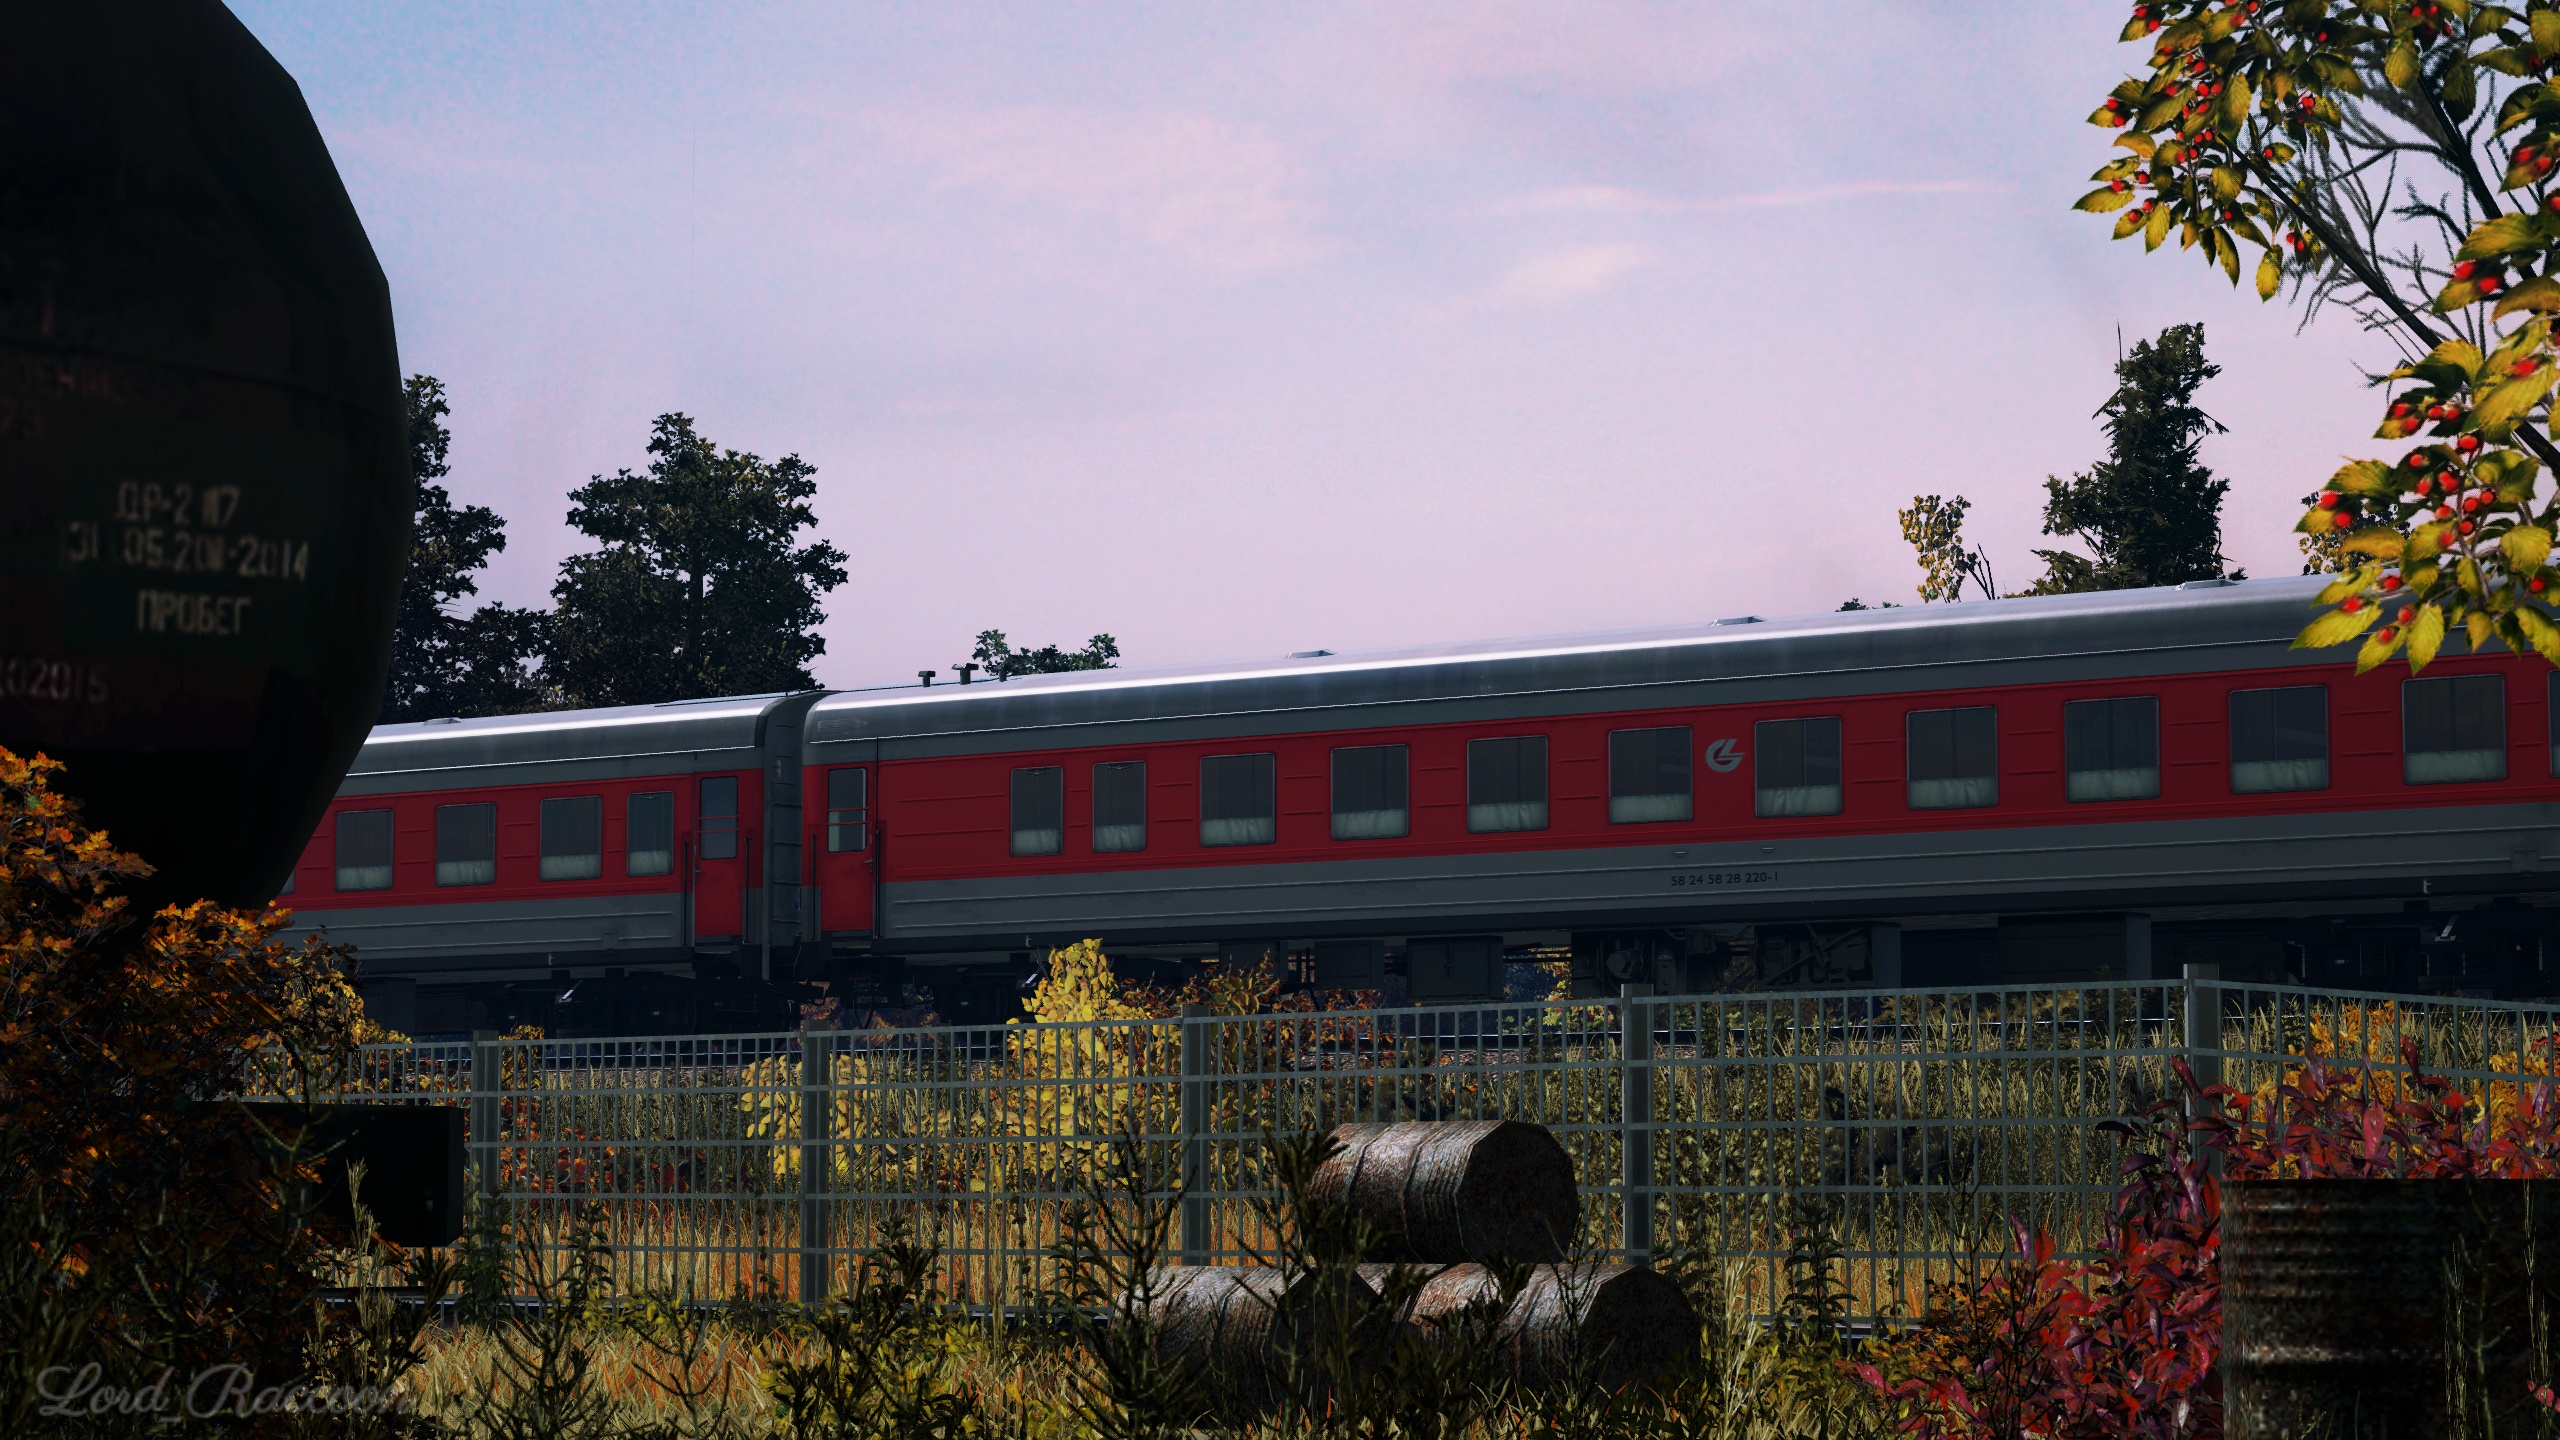 [TpF1] Old railway yard in Lithuania #2